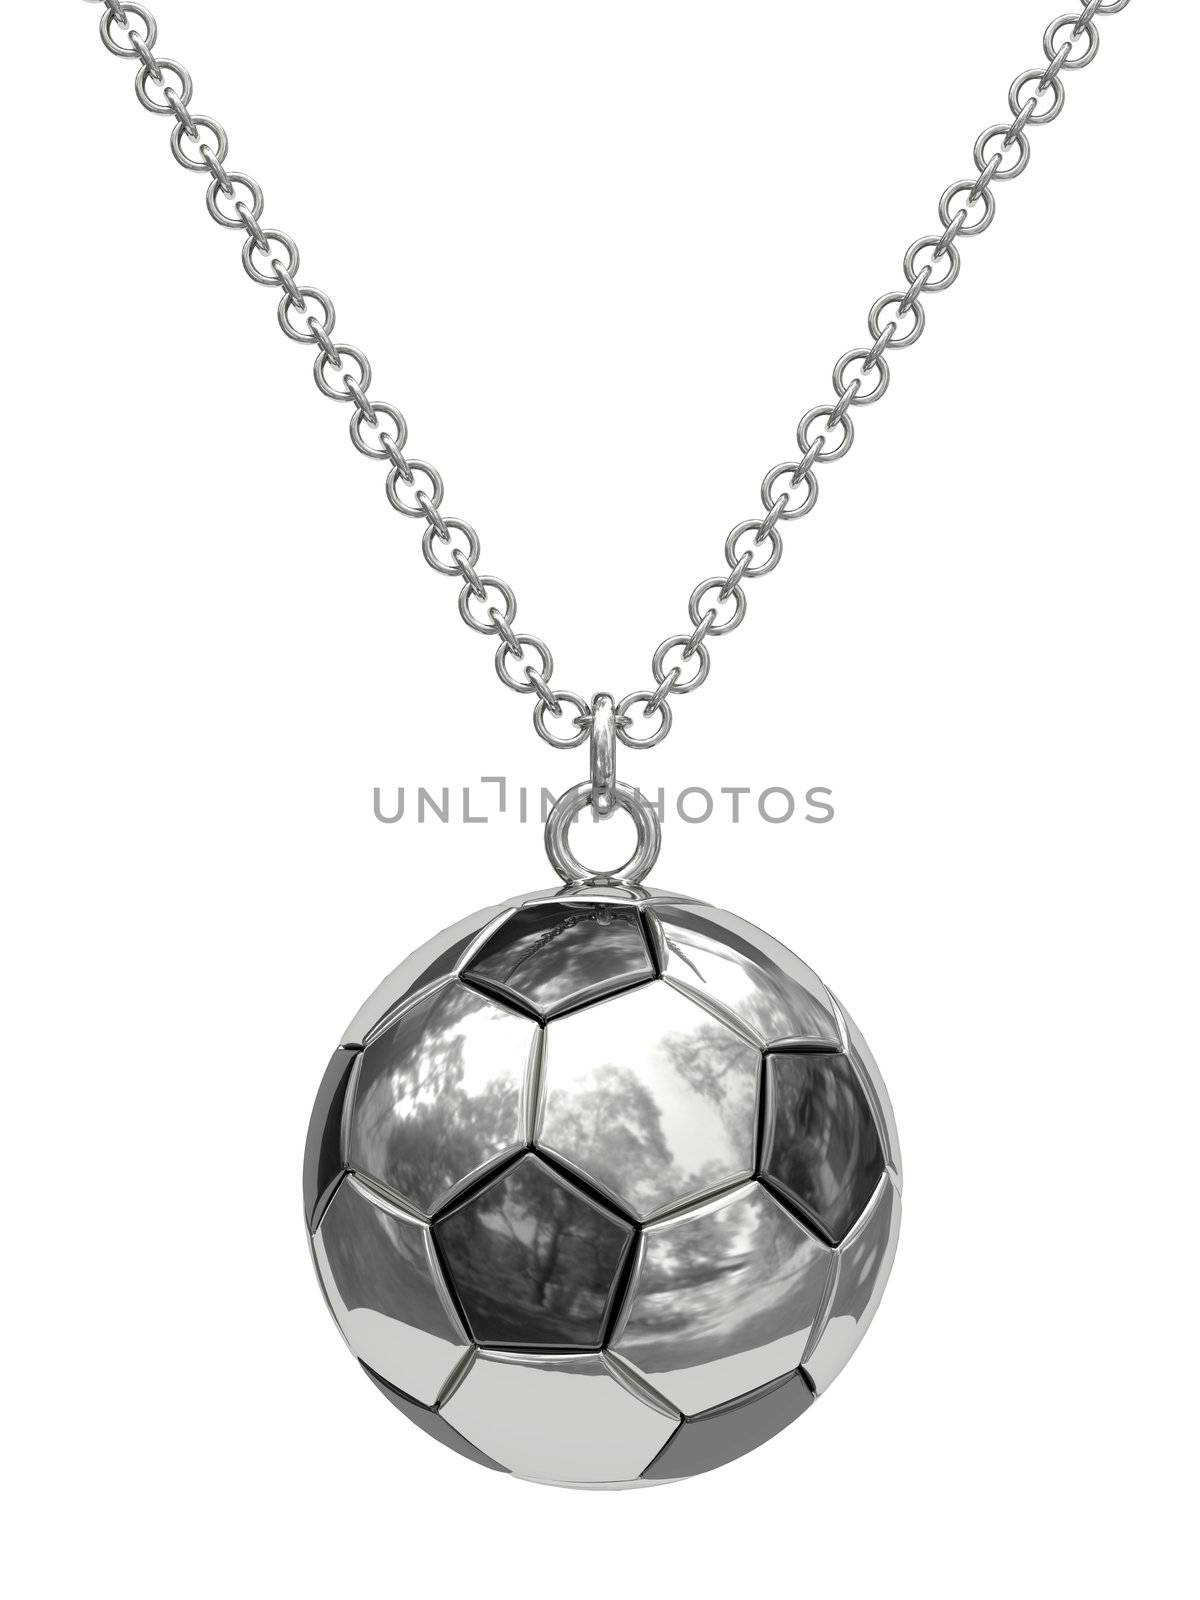 Silver pendant in shape of soccer ball on chain isolated on white. High resolution 3D image